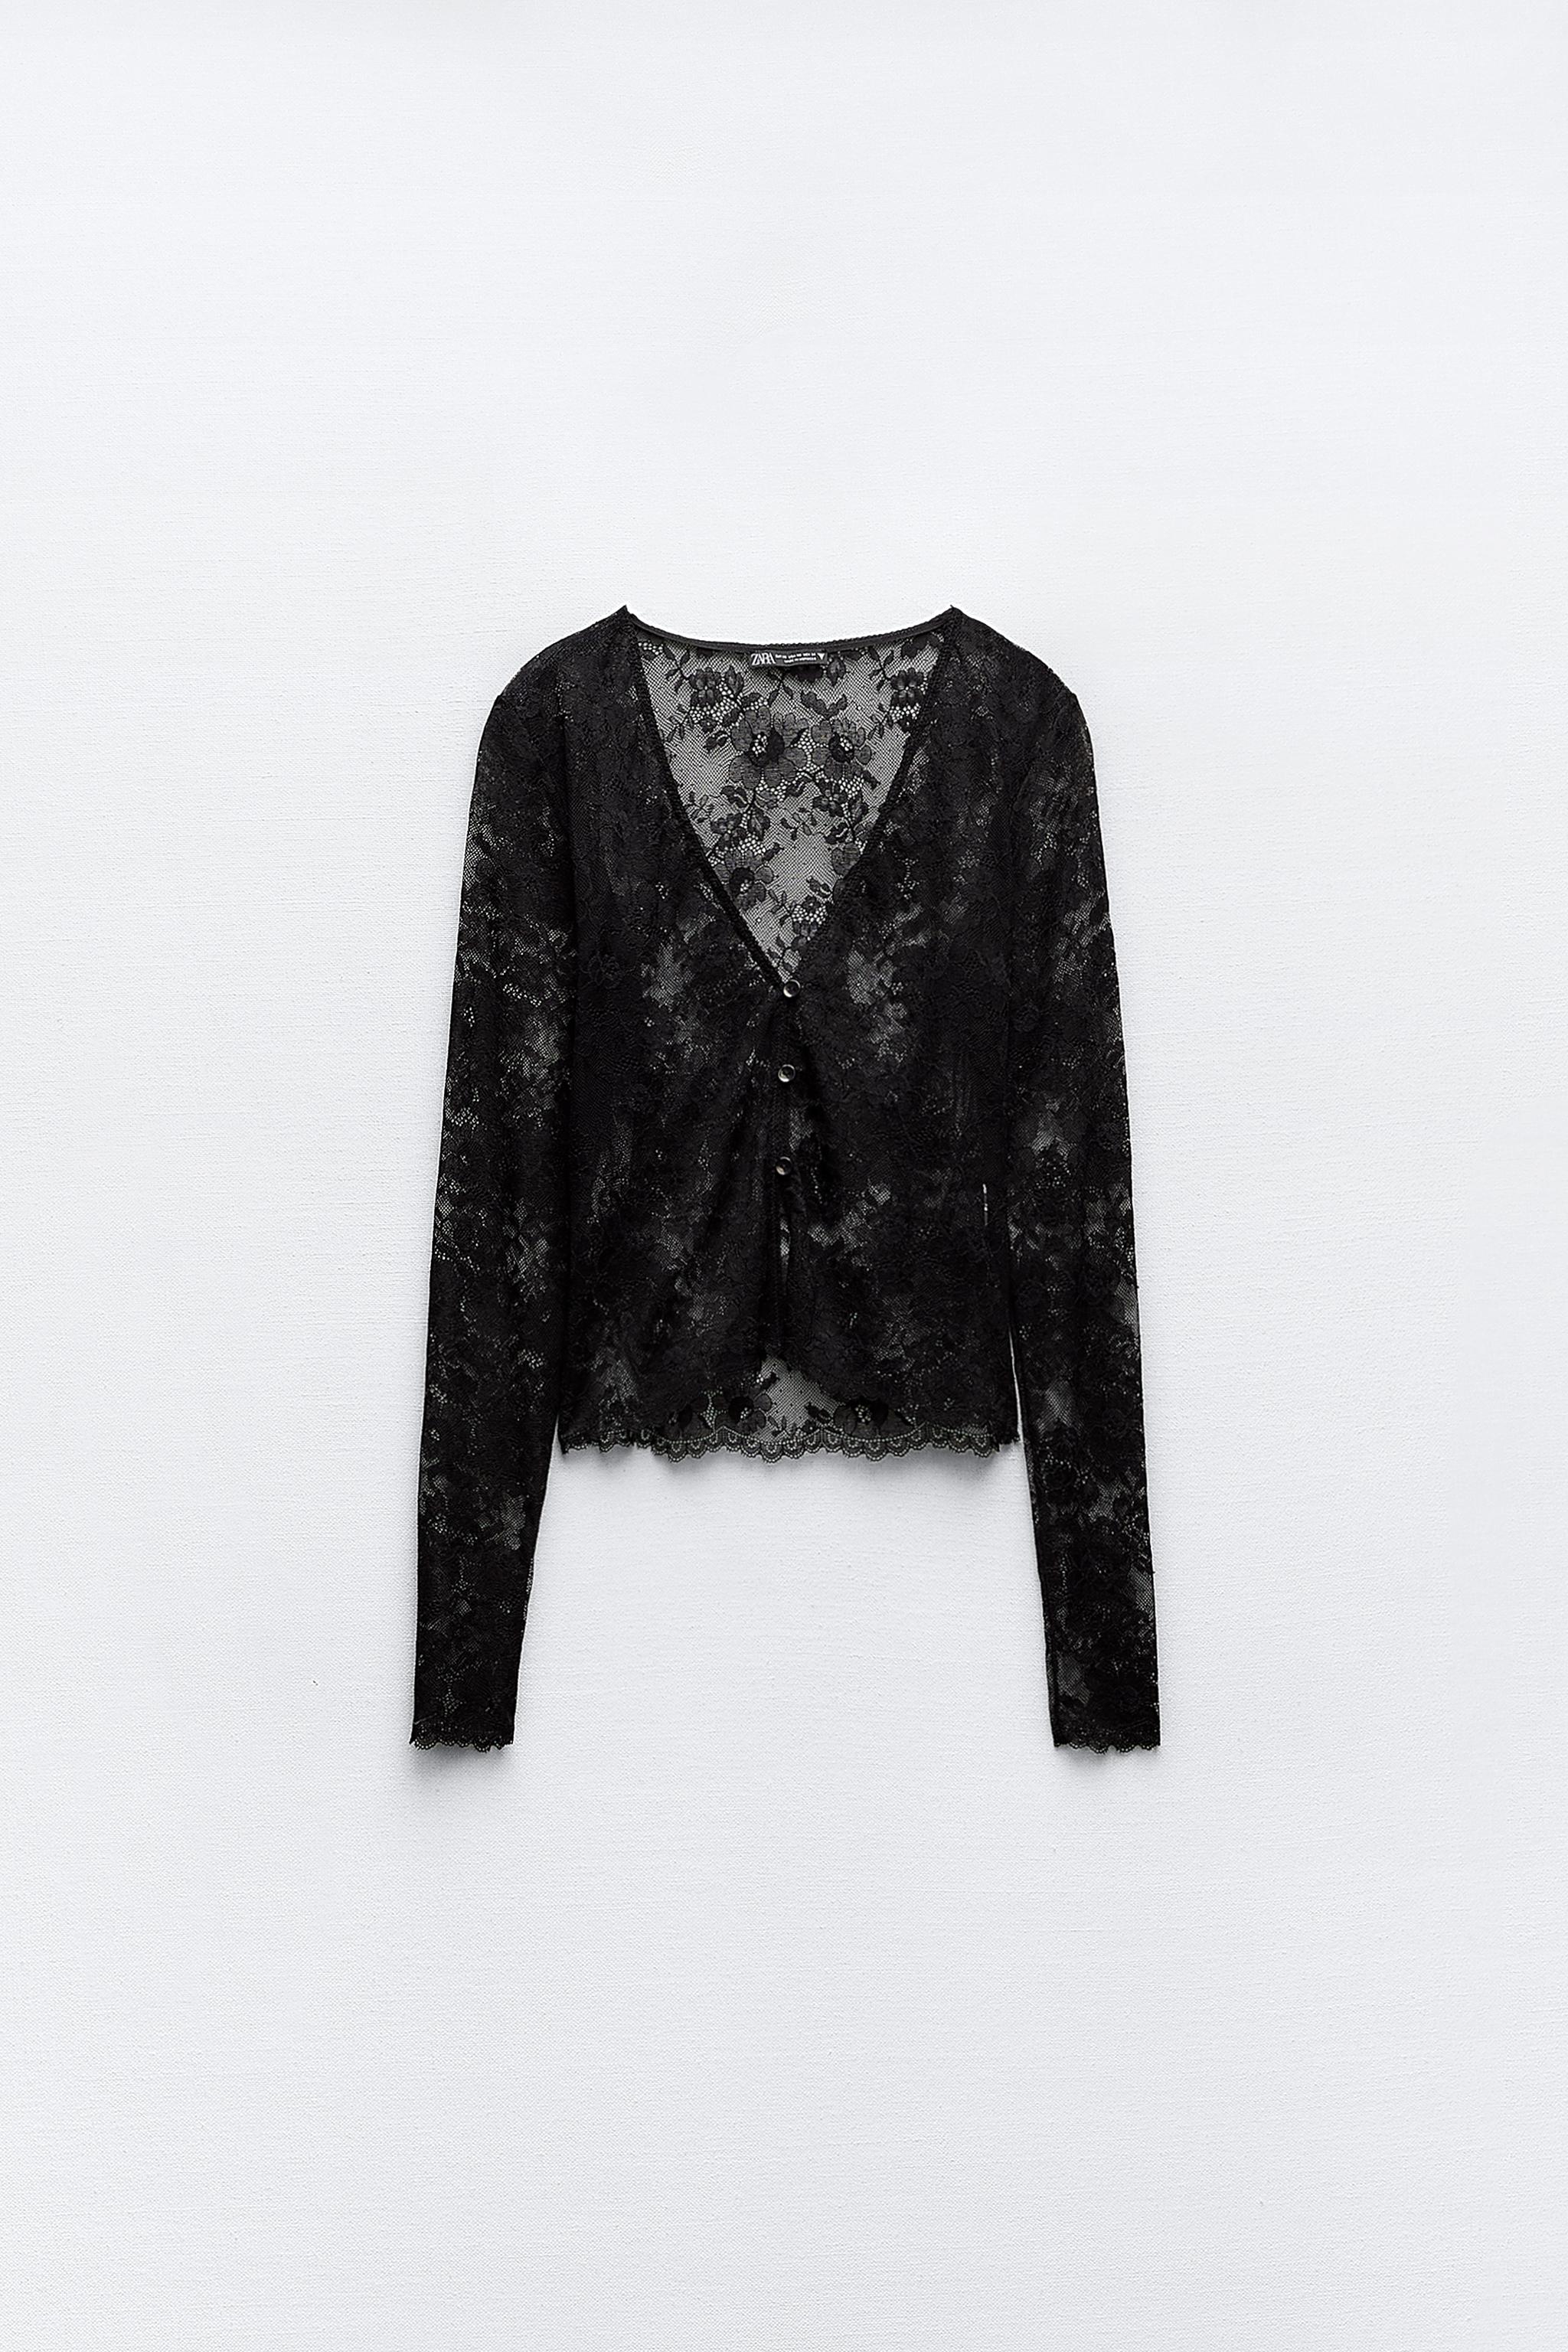 English) A black lace body with leather leggings and sequin jacket